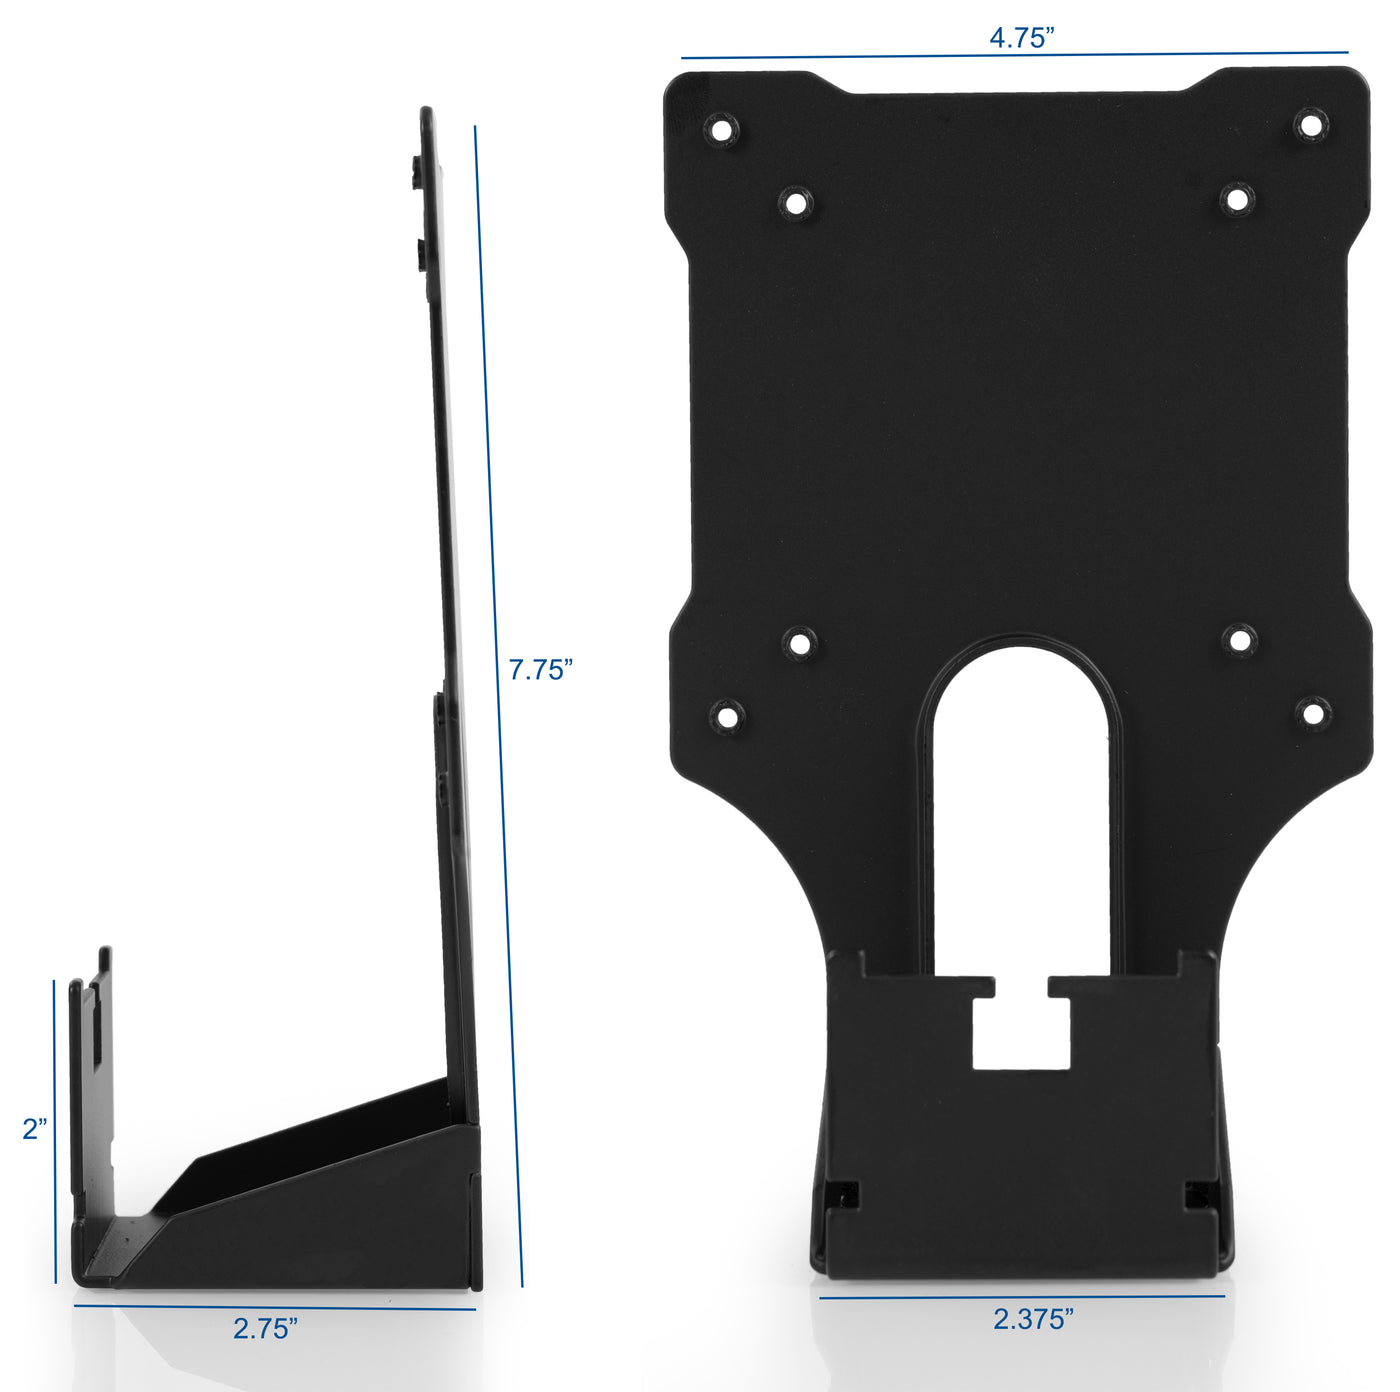 Bracket sizing and specifications to match your monitor and VESA plate of the existing monitor mount.